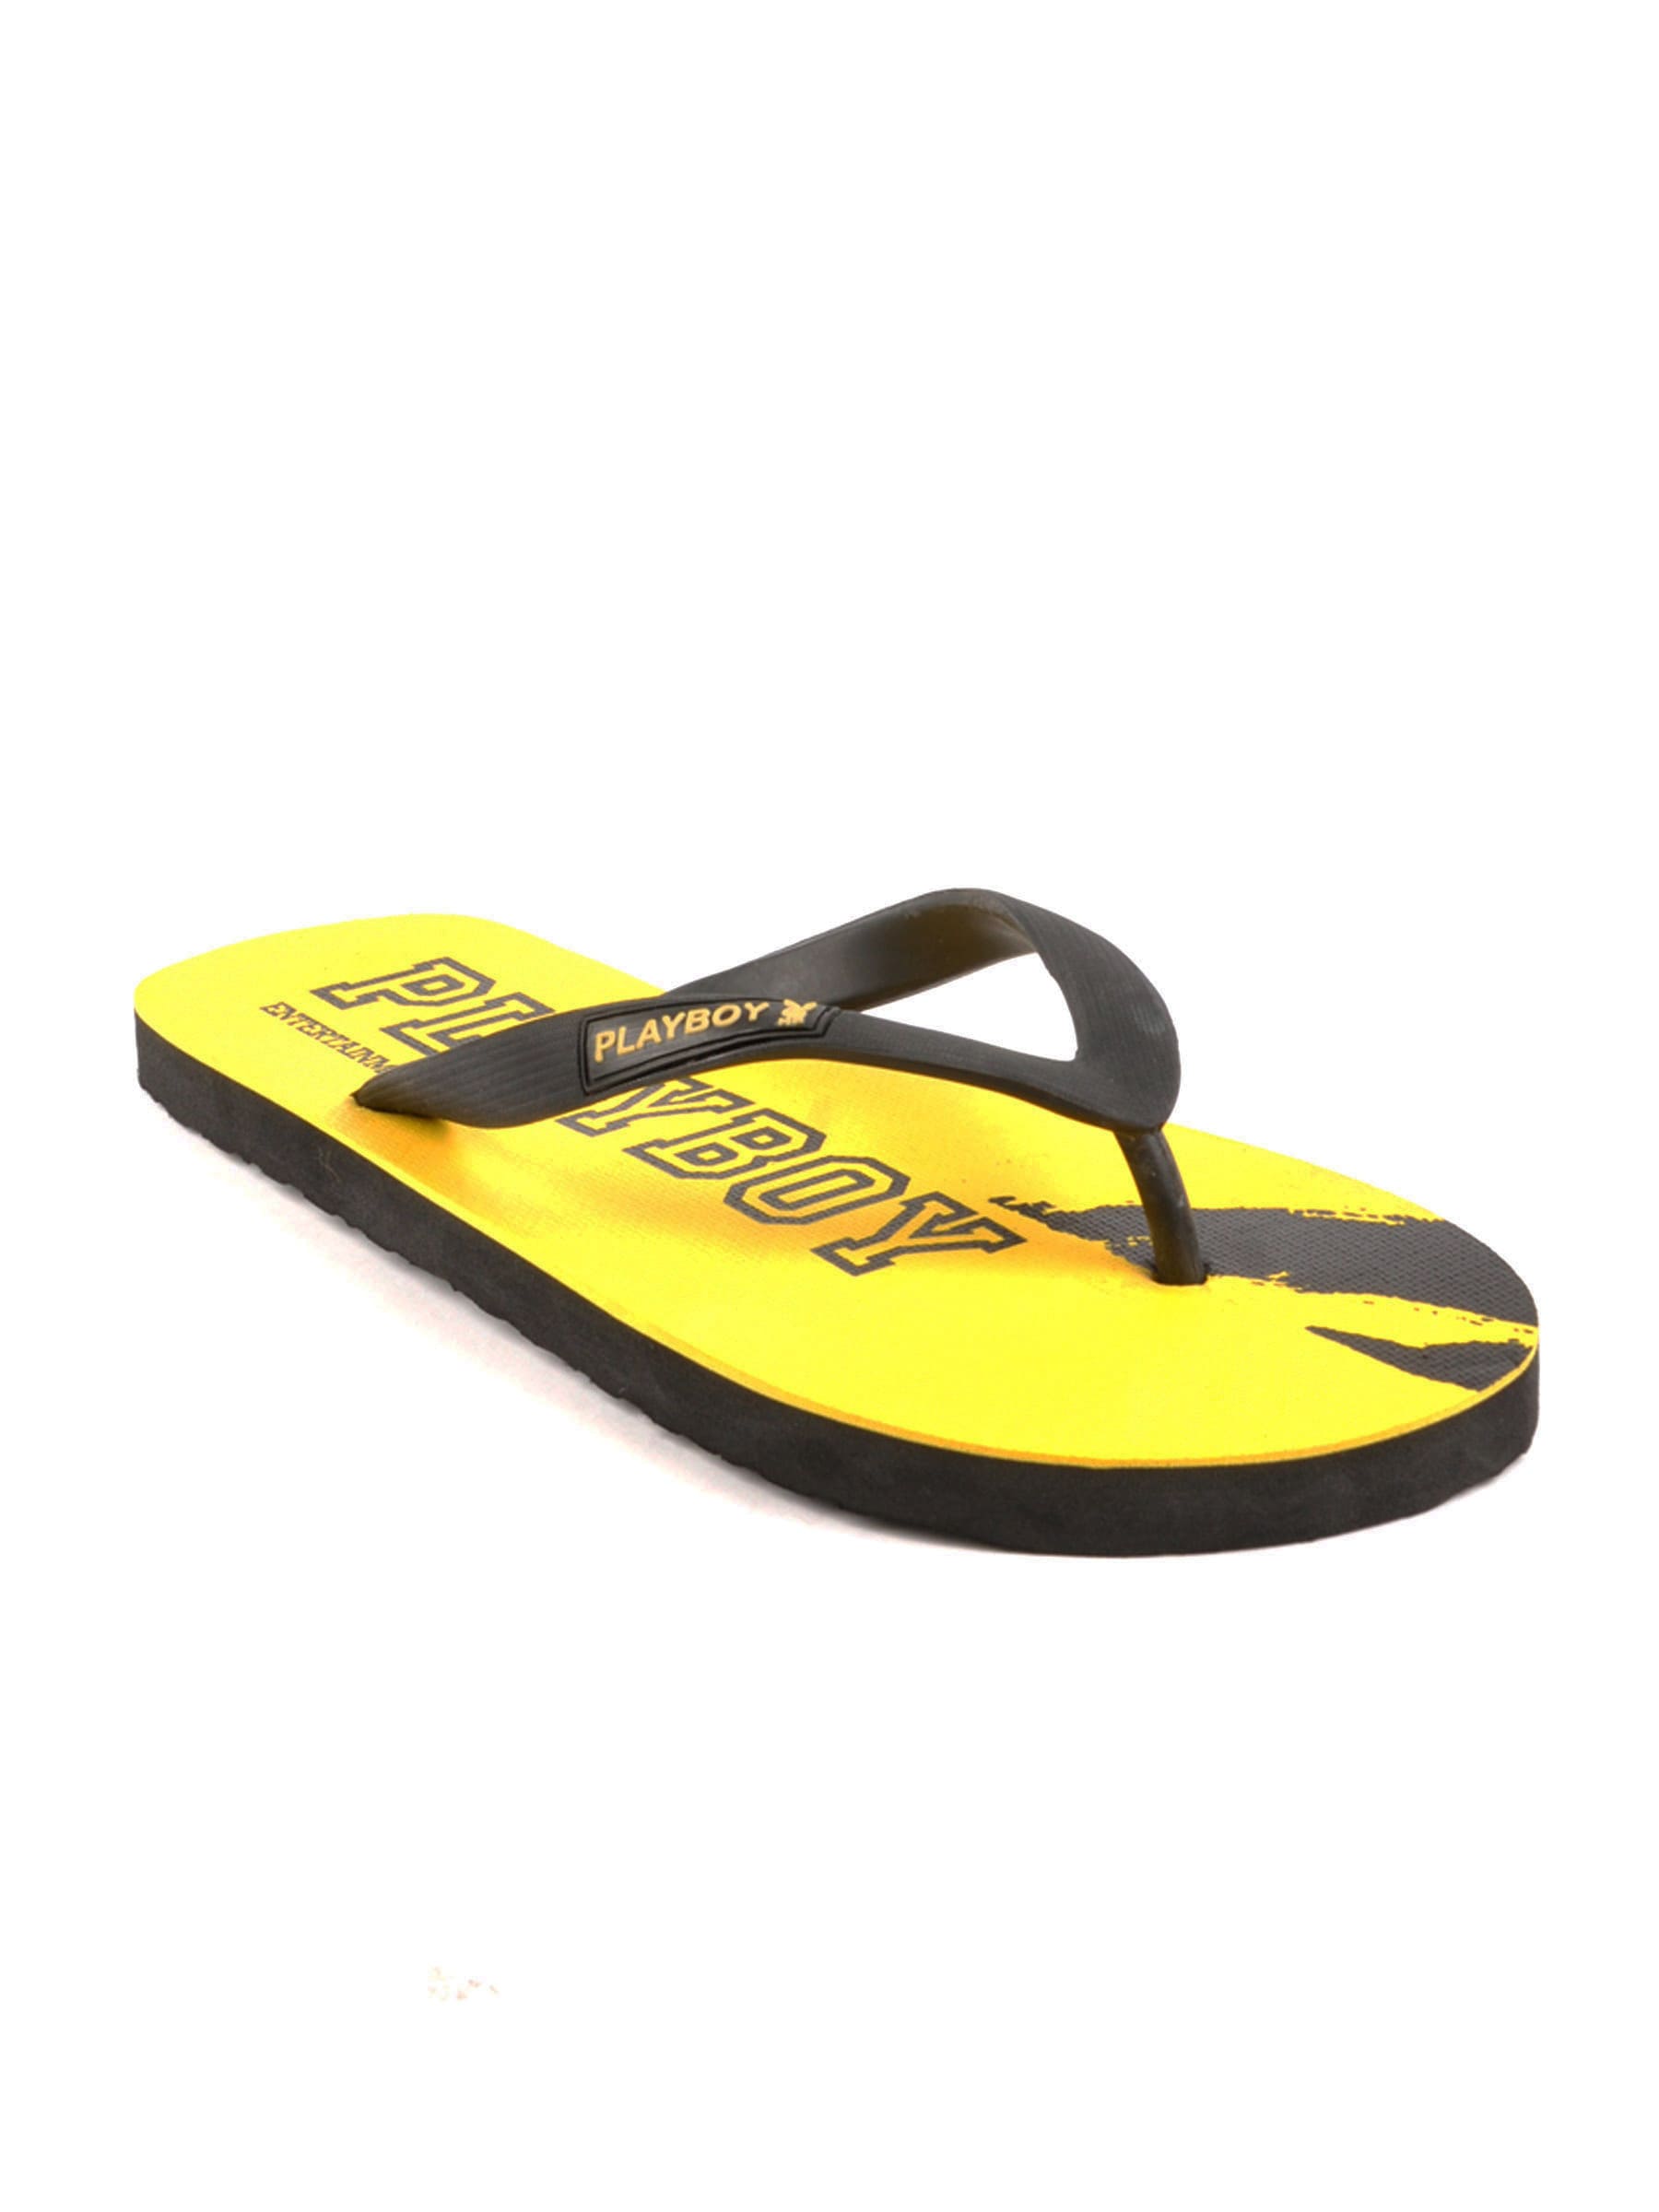 Playboy Men Casual Yellow Slippers